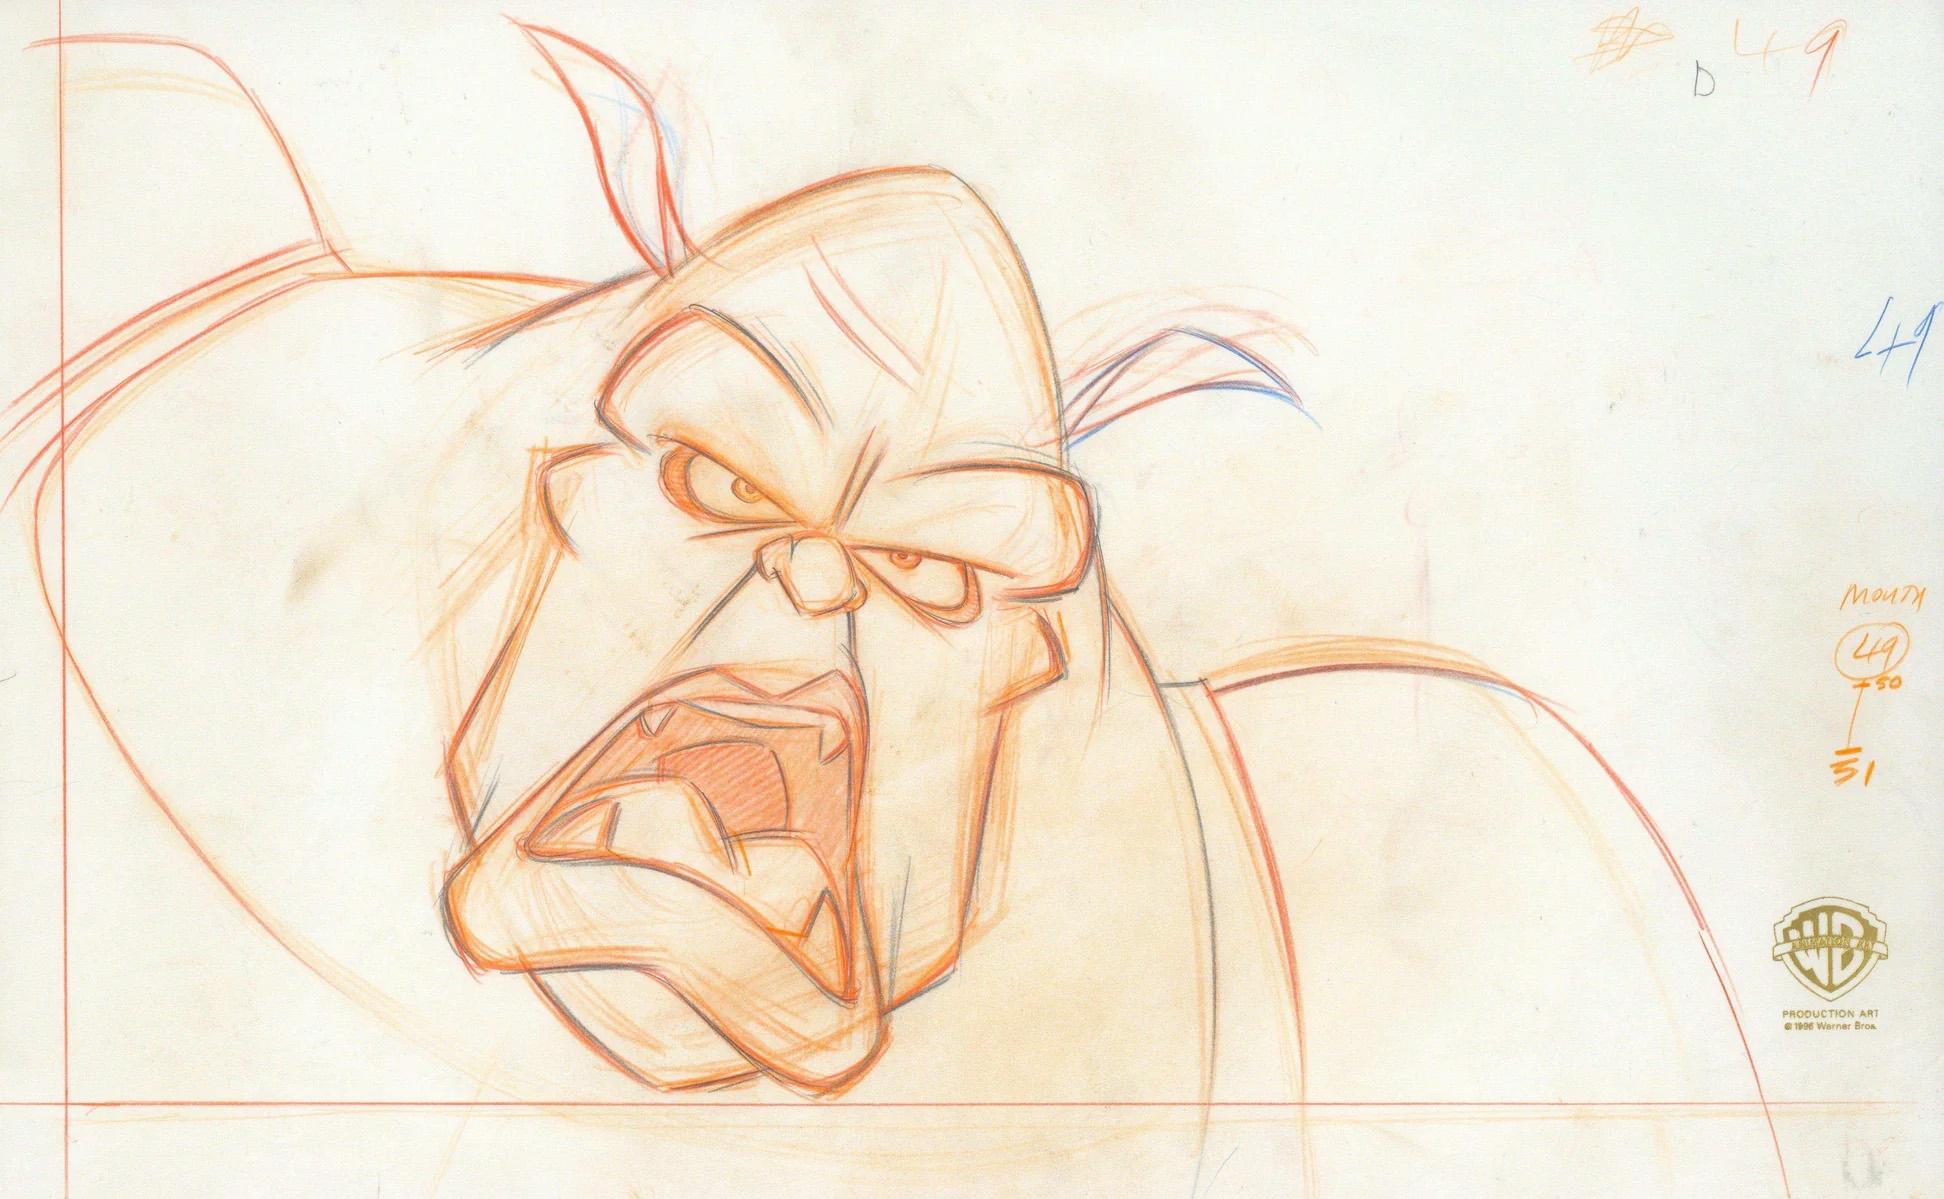 Space Jam Original Production Drawing: Monstar Pound - Art by Looney Tunes Studio Artists